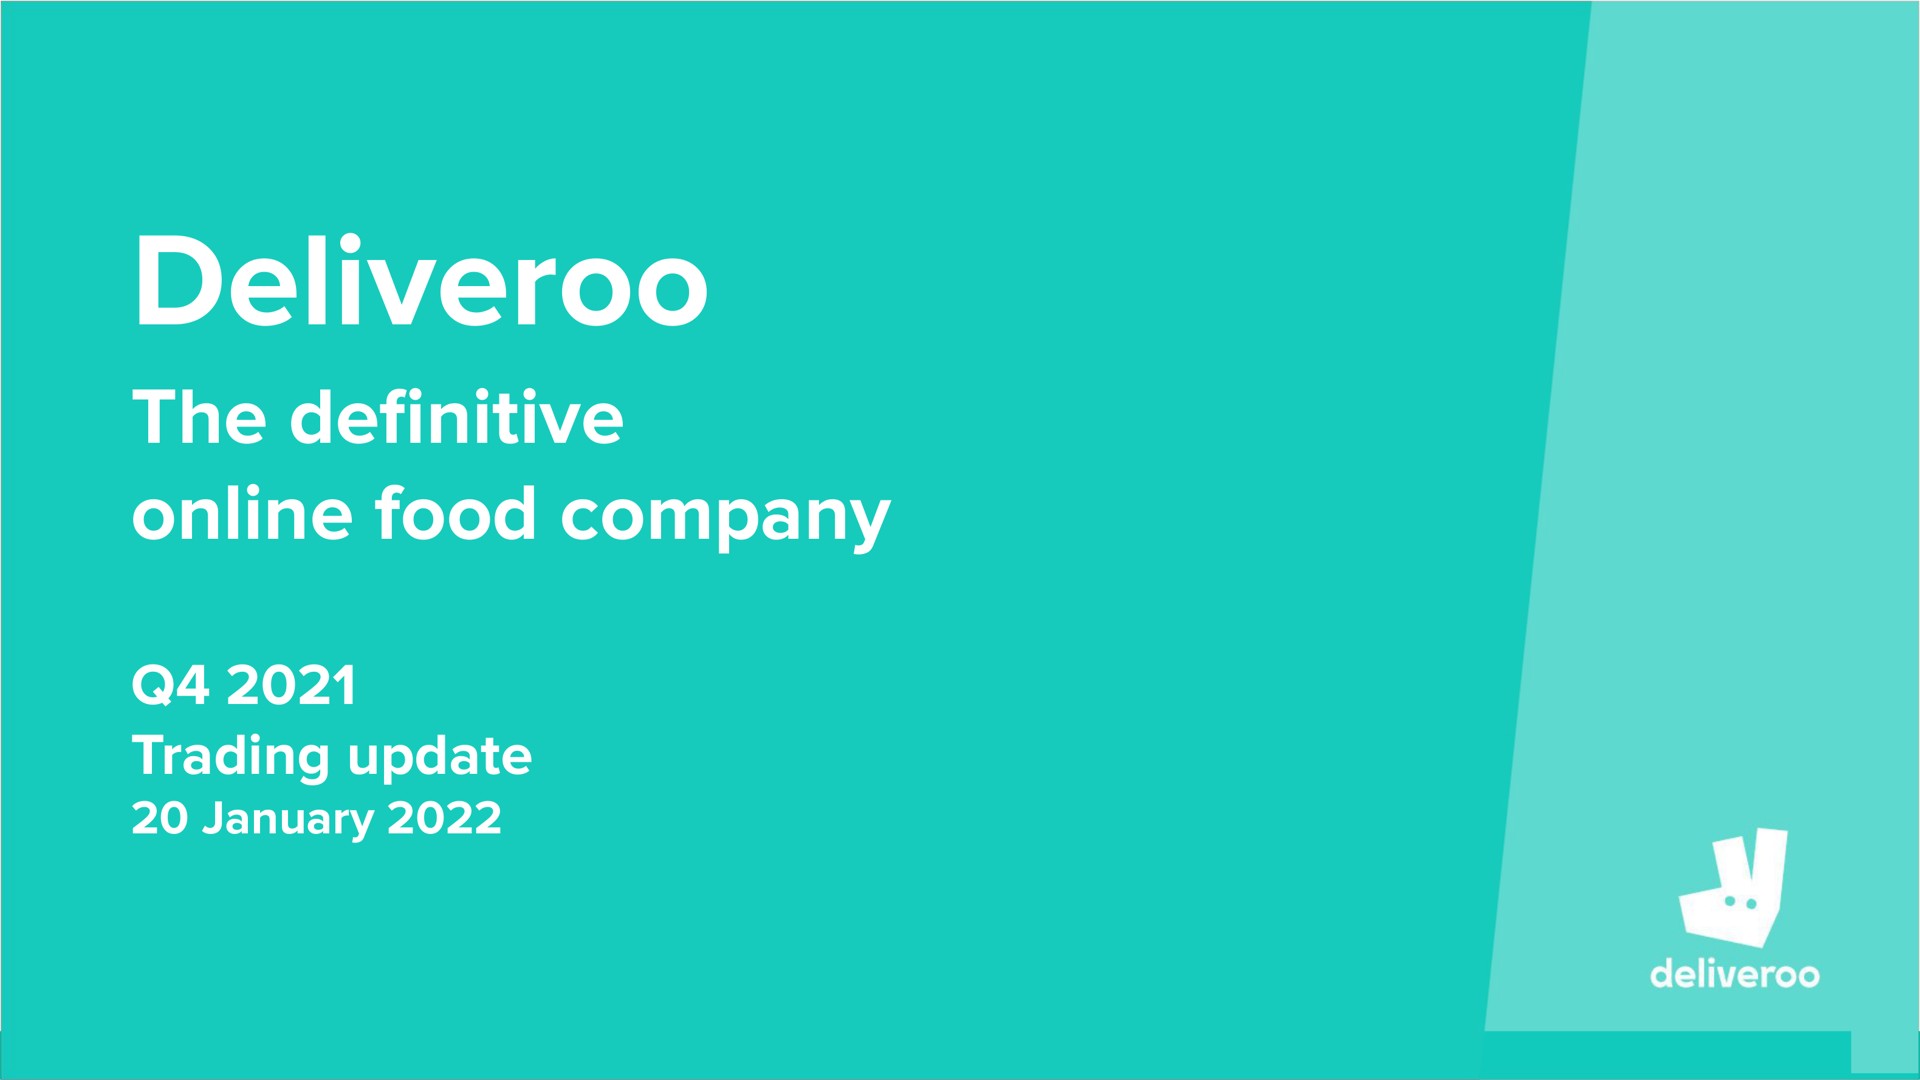 the food company trading update definitive | Deliveroo